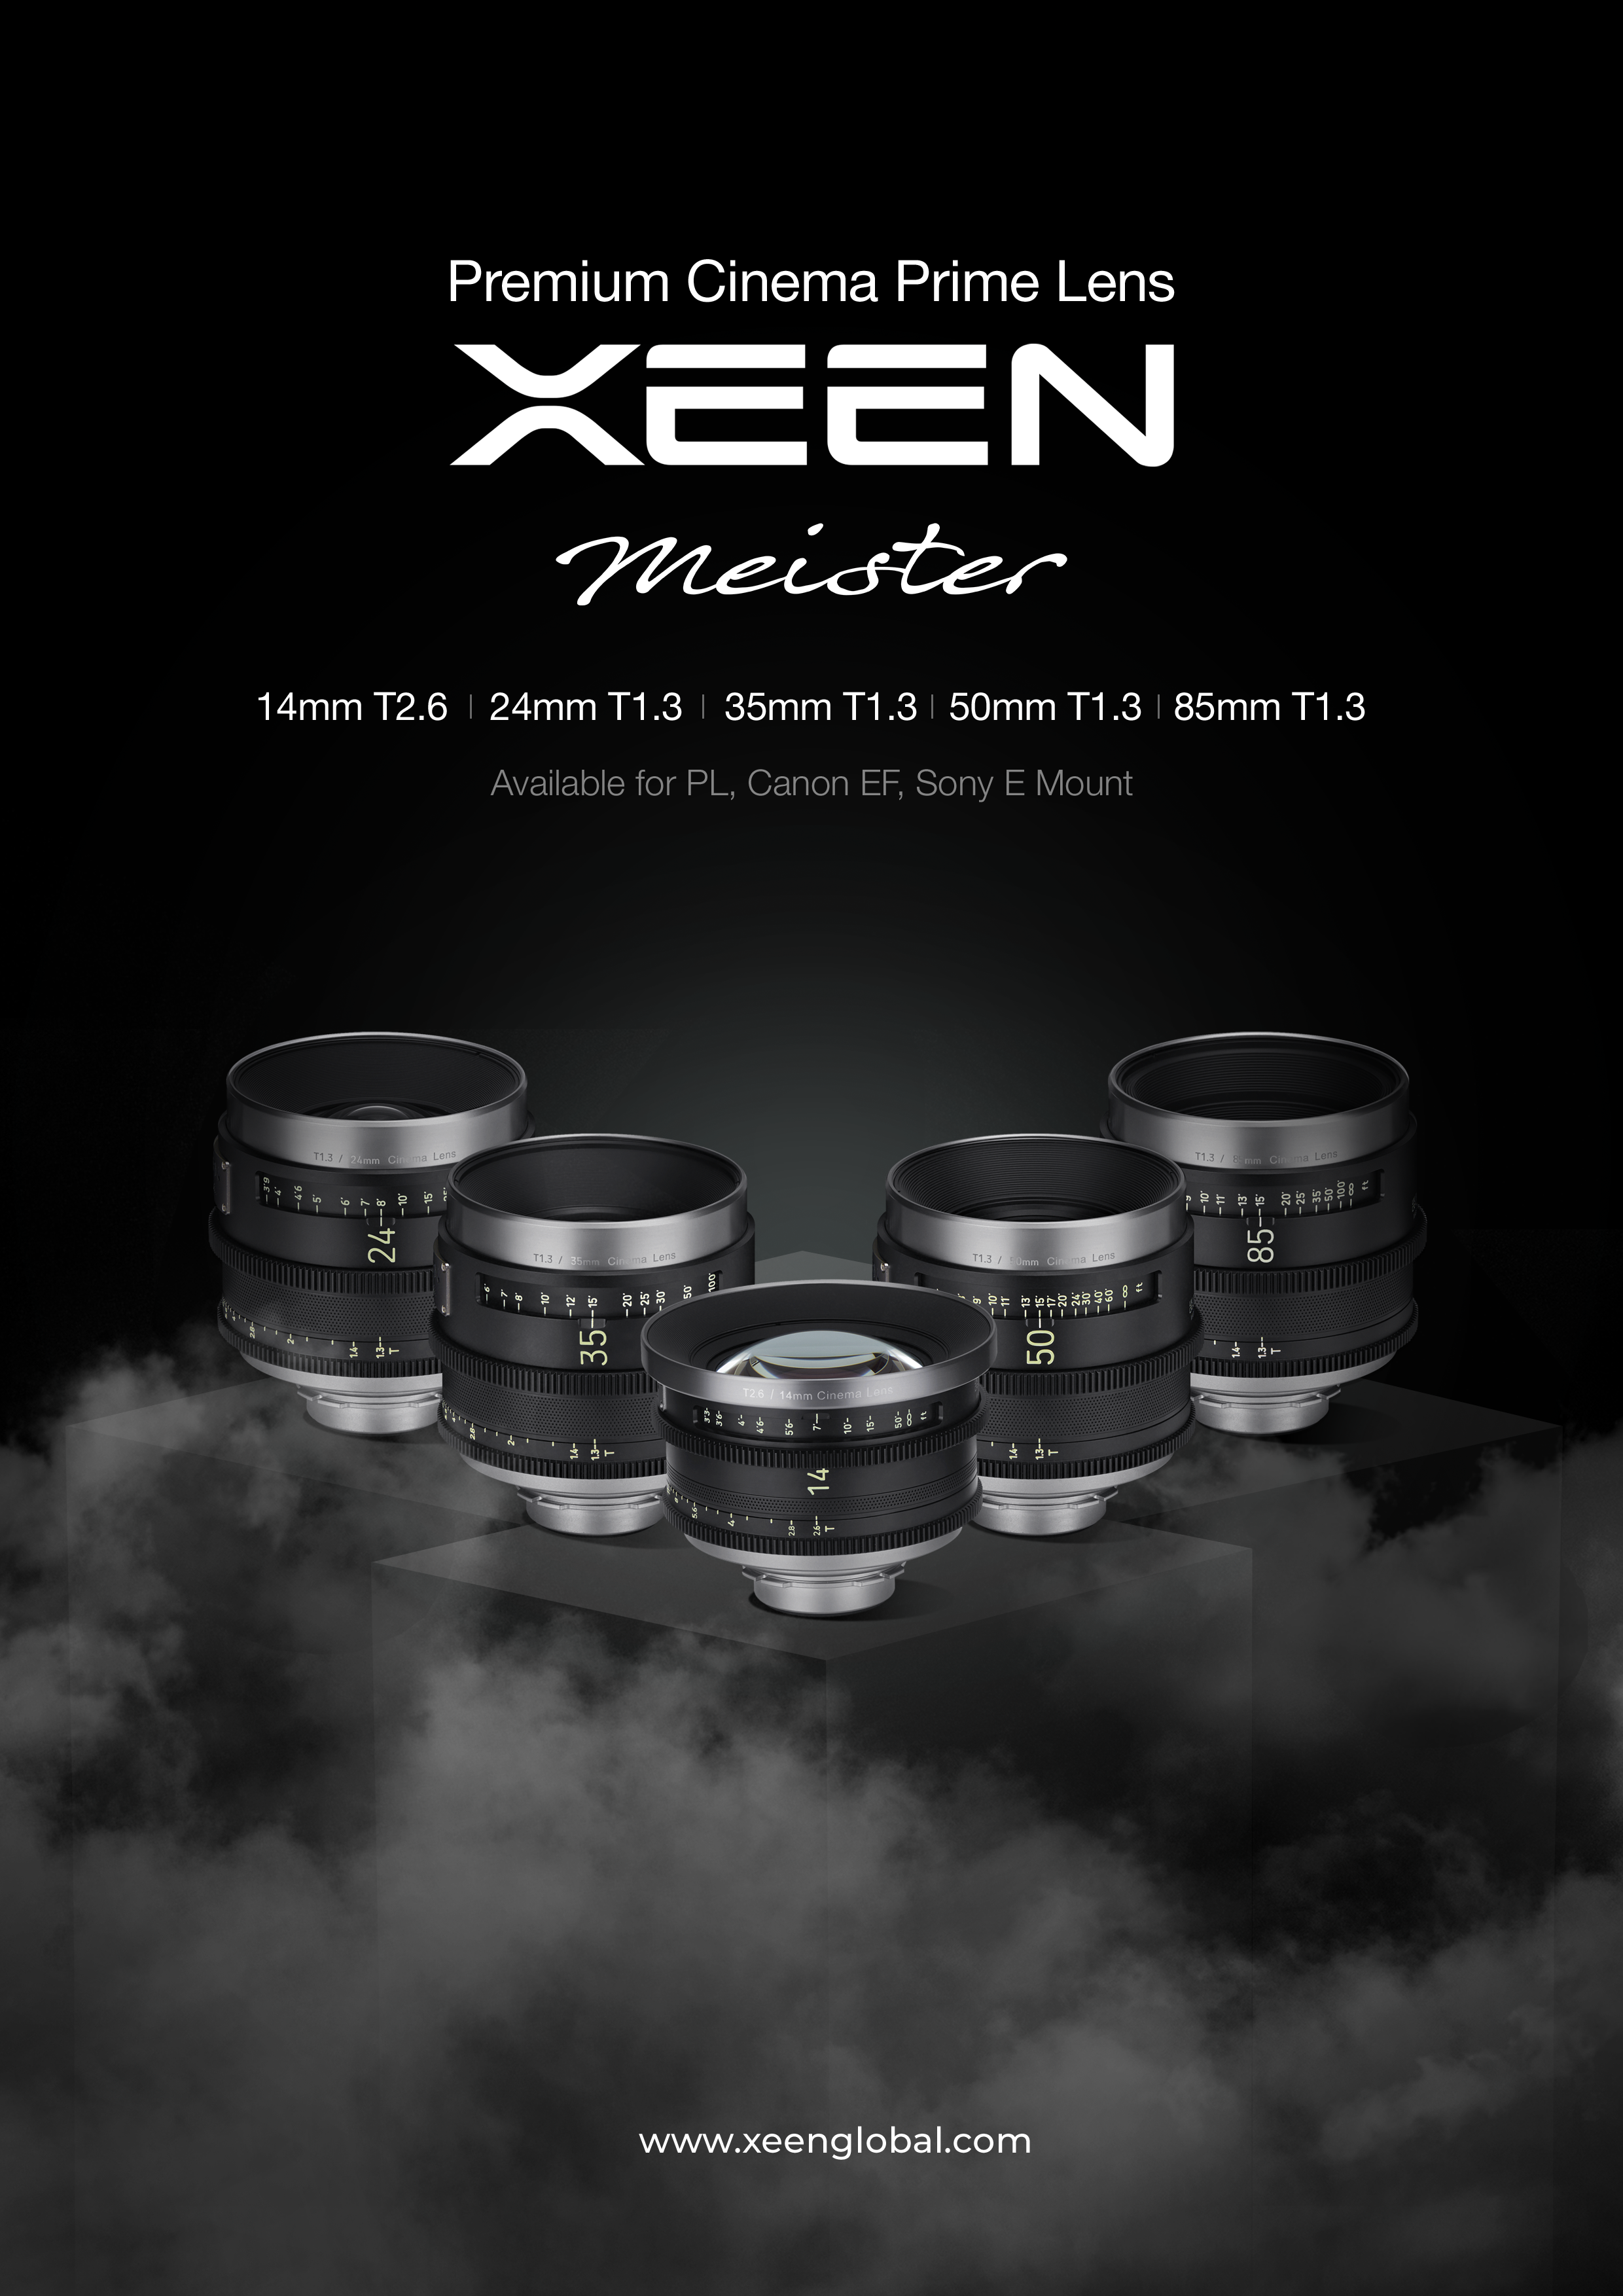 Introducing XEEN Meister: Elevating Cinematic Excellence with Unparalleled Optics and Performance